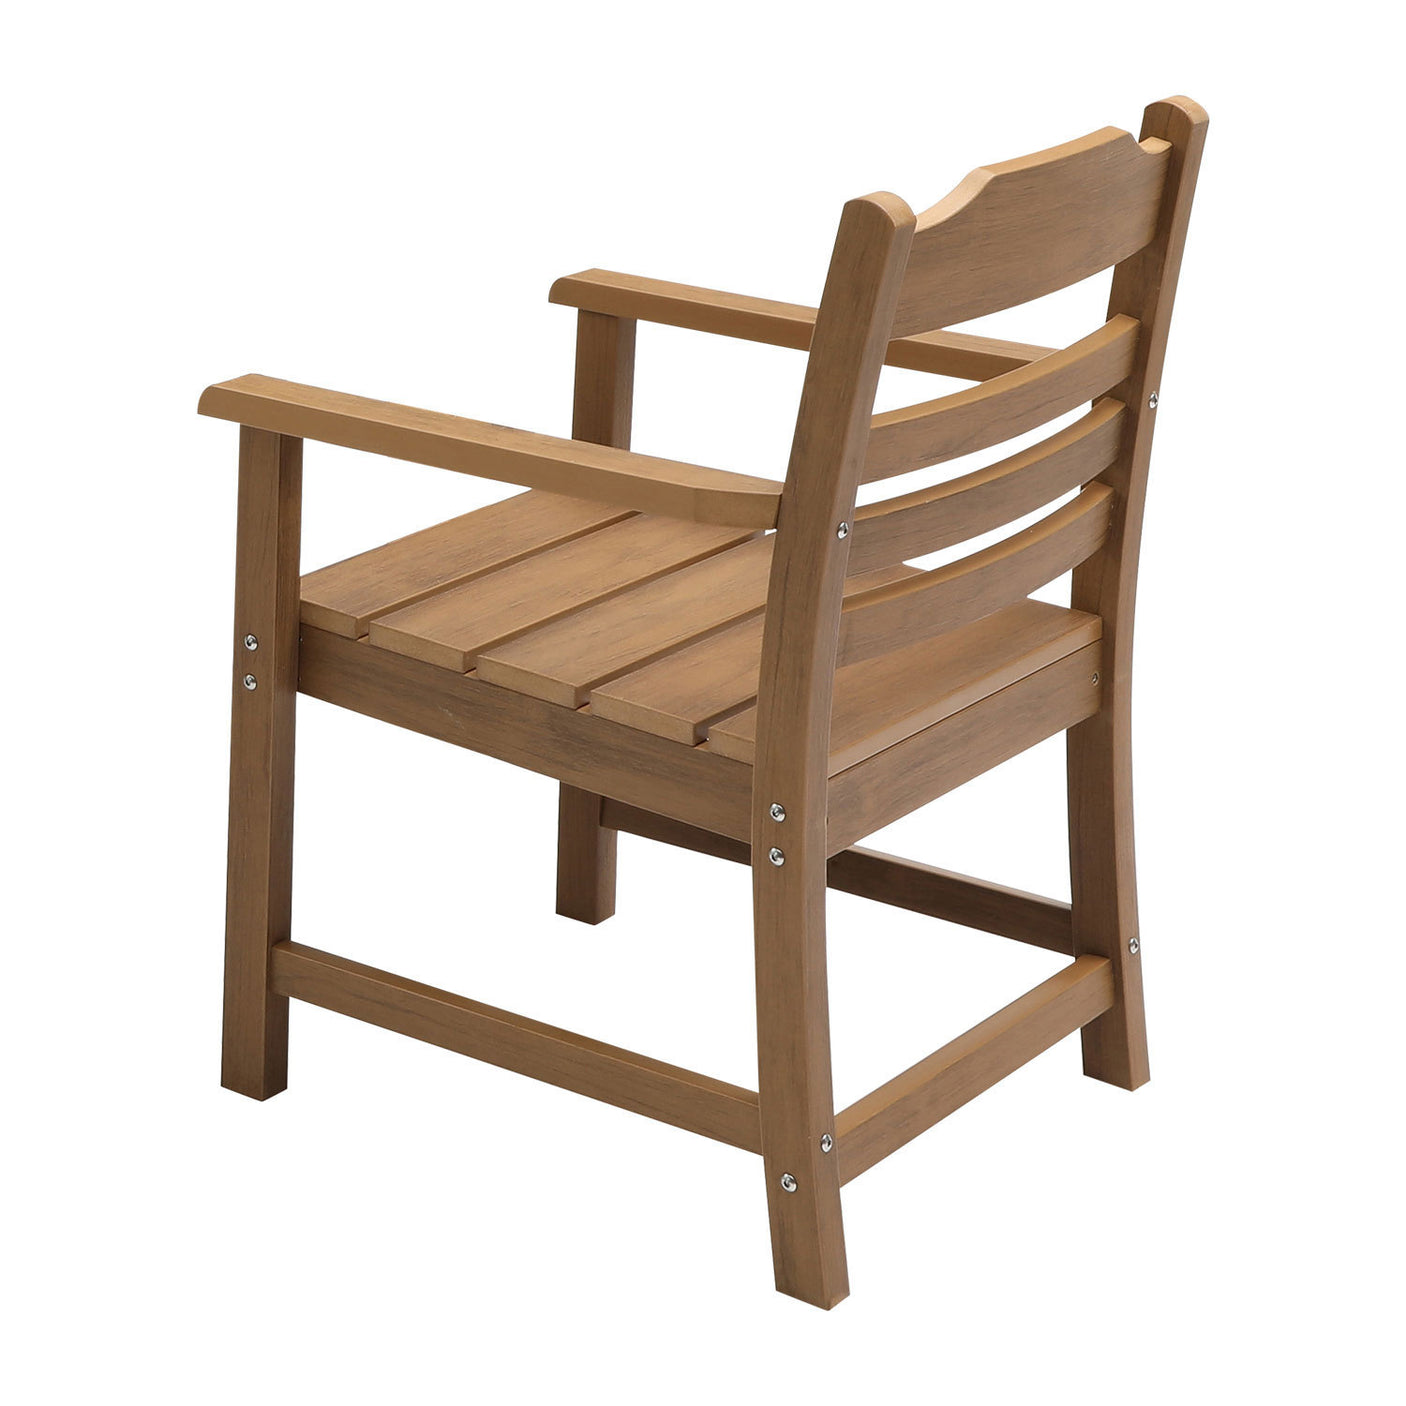 Patio Dining Chair with Armset Set of 2,  HIPS Materialwith Imitation Wood Grain Wexture, Teak